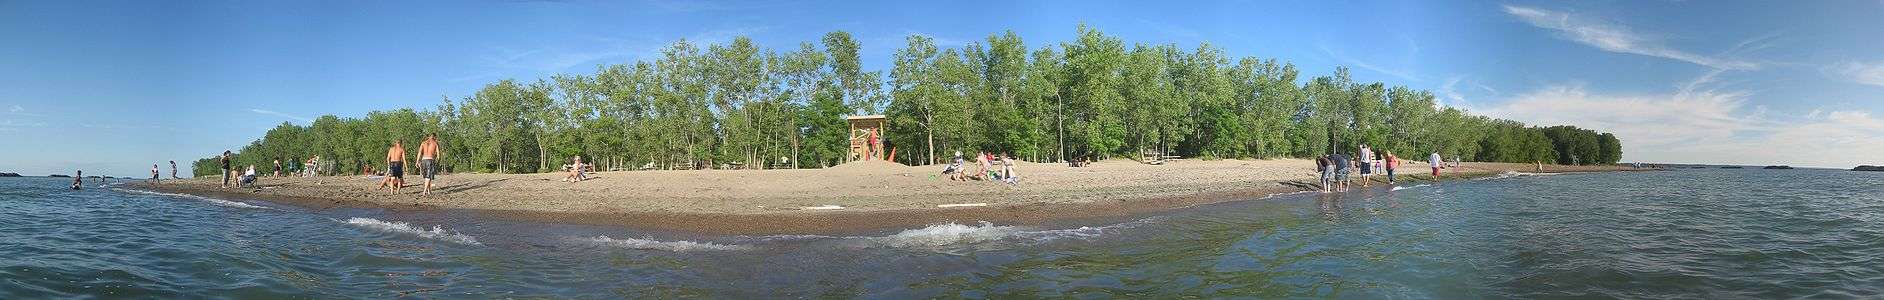 A view of a sunlit beach, that is flanked by green trees, from the water under a mostly clear, blue sky with several vacationers.